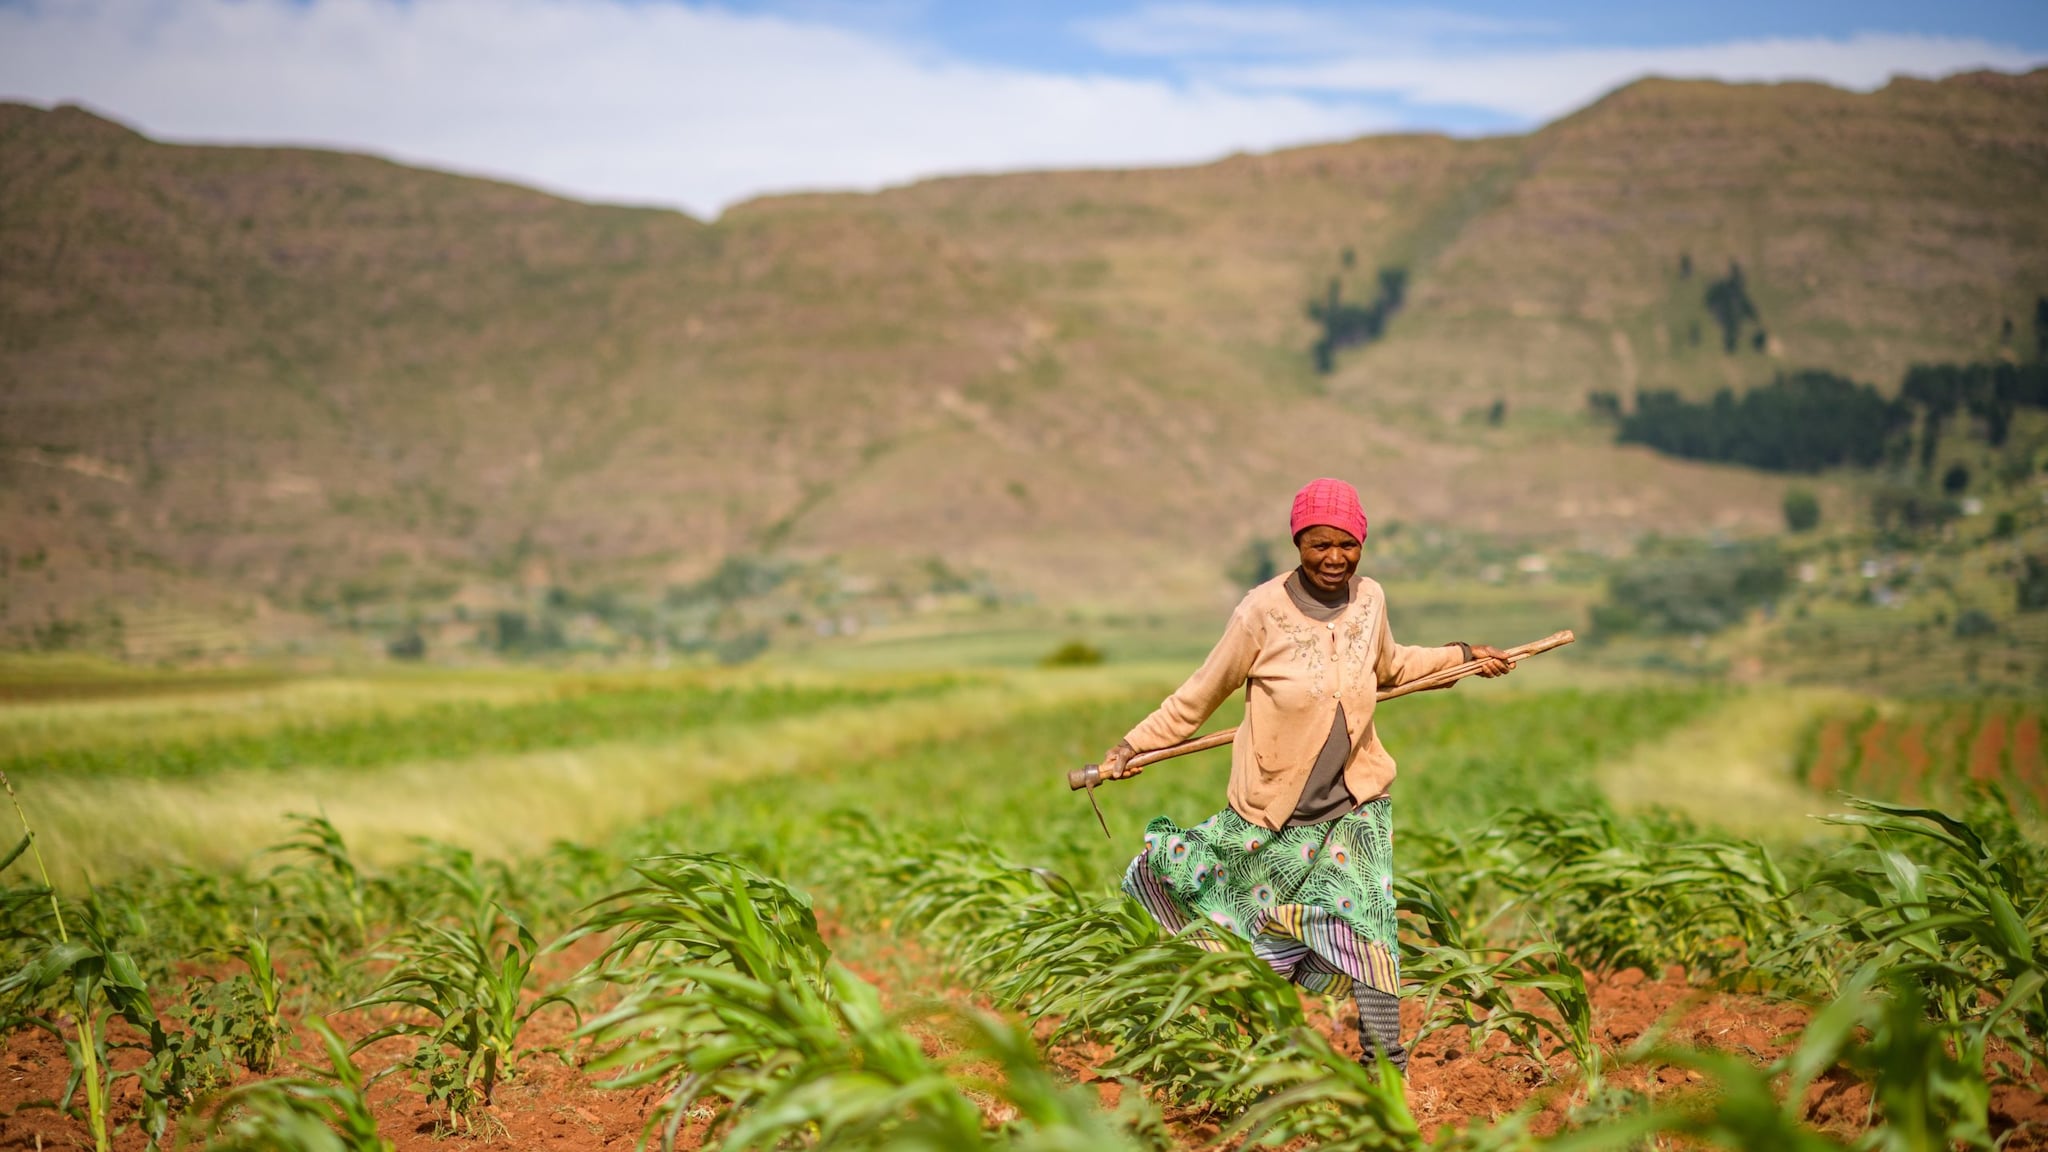 An older African woman walks in a corn field while carrying a hoe